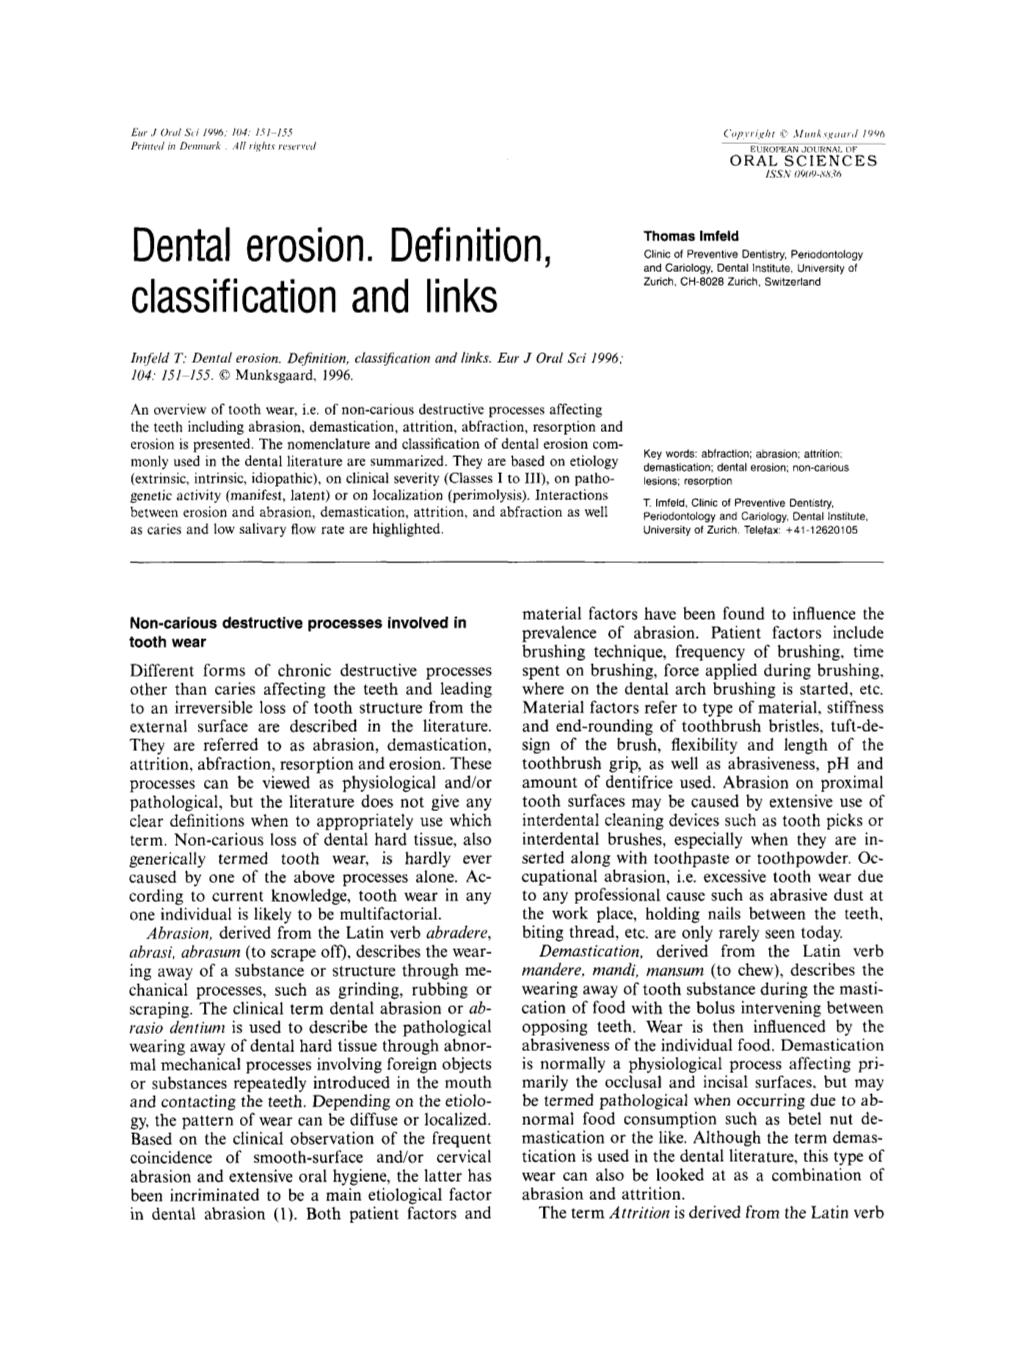 Dental Erosion. Definition, Classification and Links